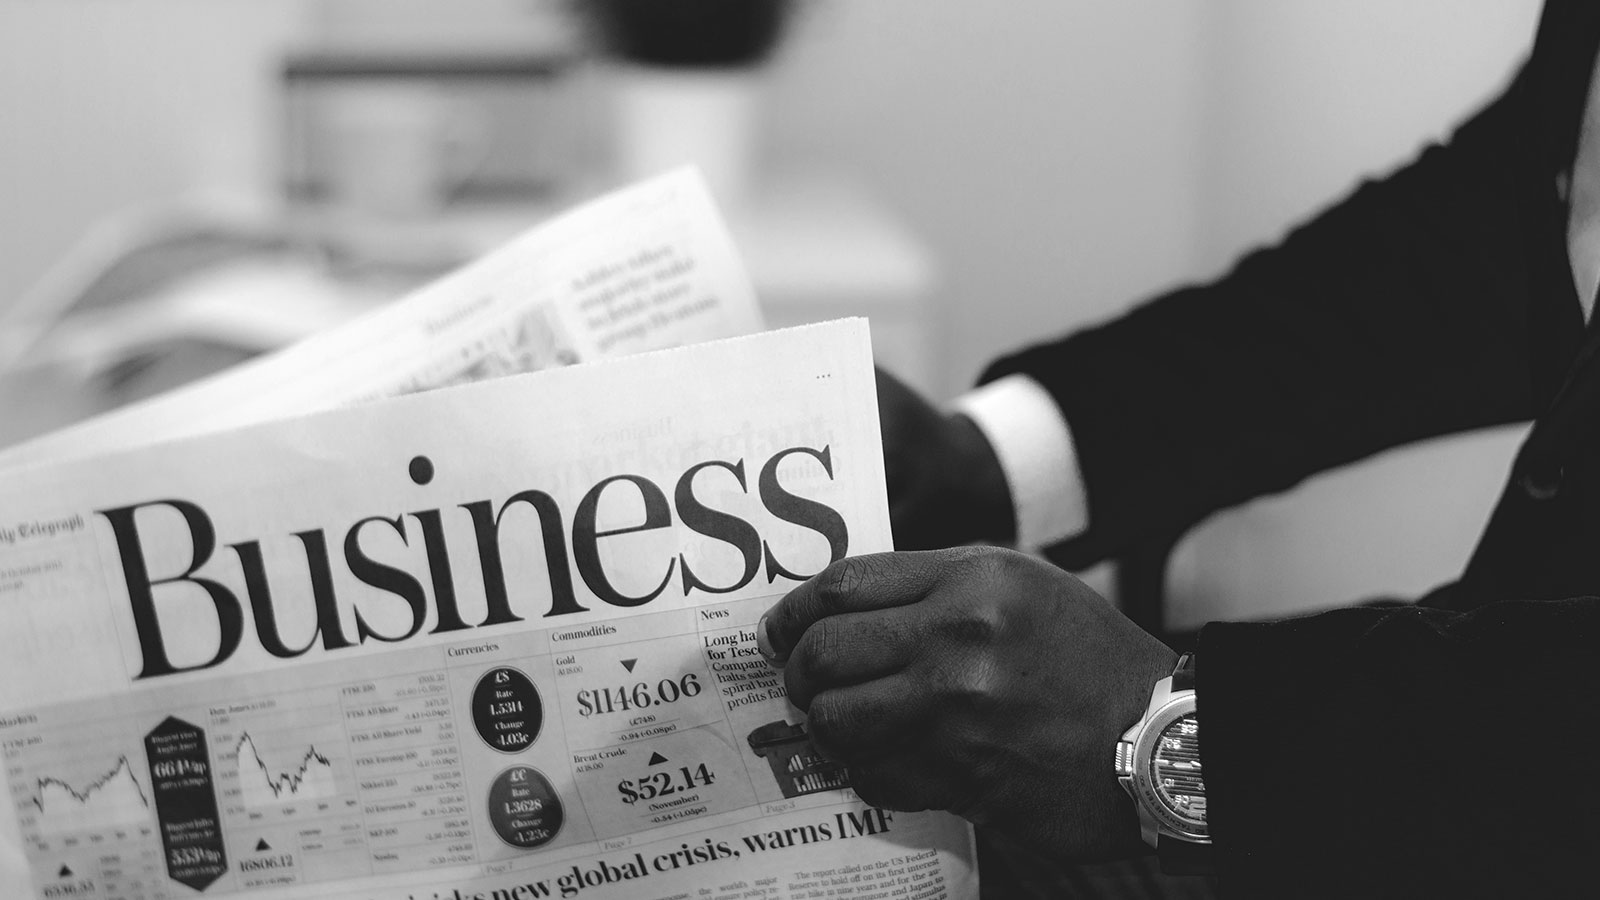 LeasePilot Brand Identity – Photography: Man Holding Business Section of Newspaper in Black & White